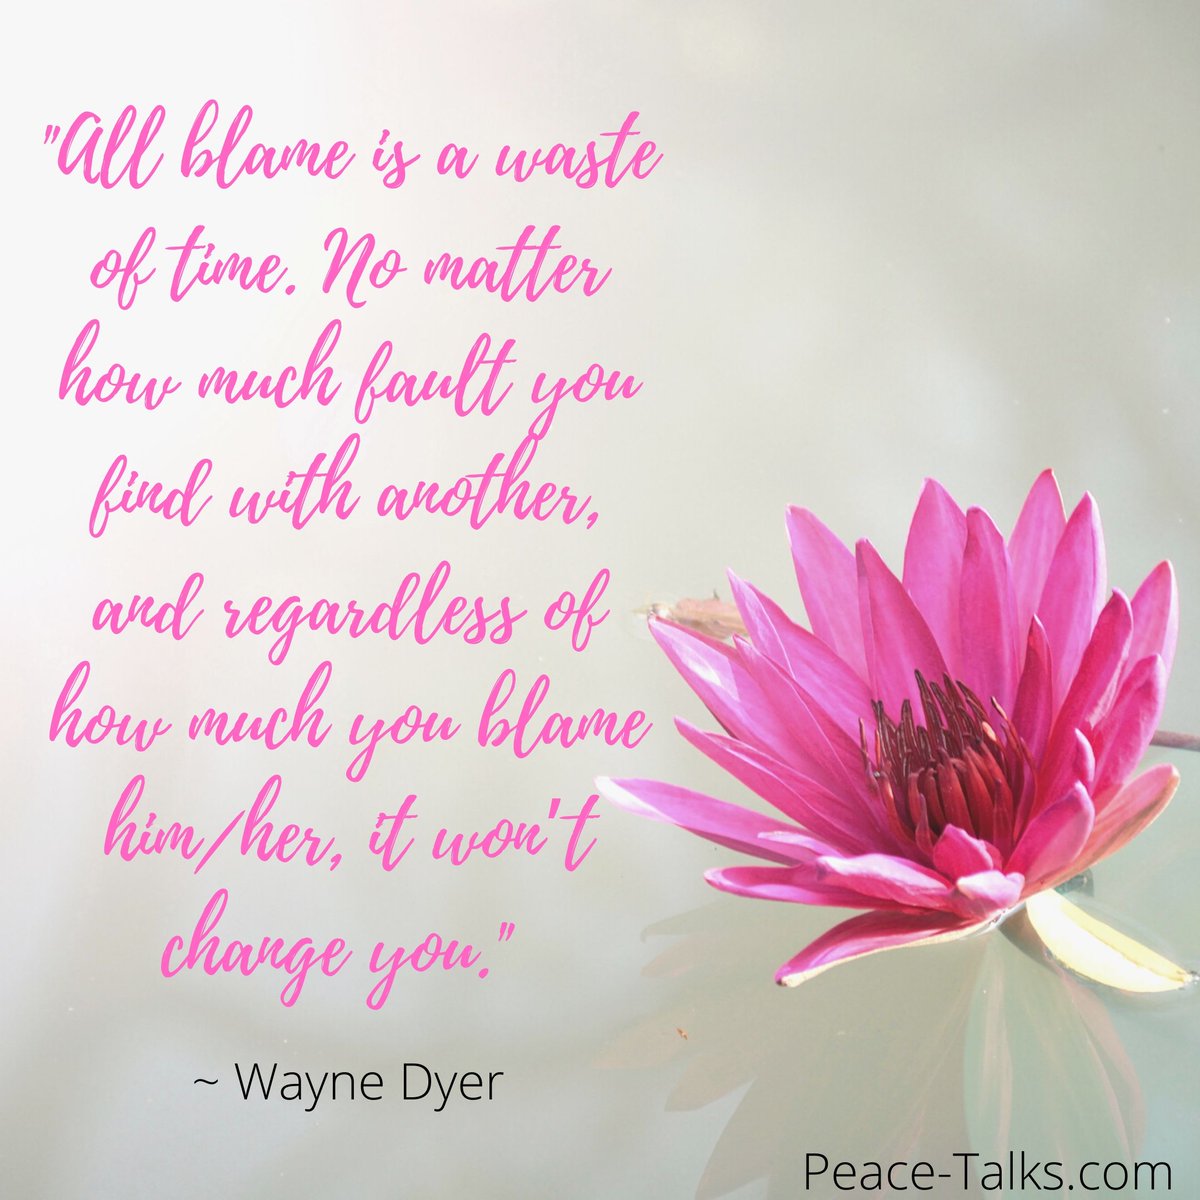 'All blame is a waste of time. No matter how much fault you find with another, and regardless of how much you blame him/her, it won’t change you.' ~ Wayne Dyer #divorce #divorcemediation #losangeles